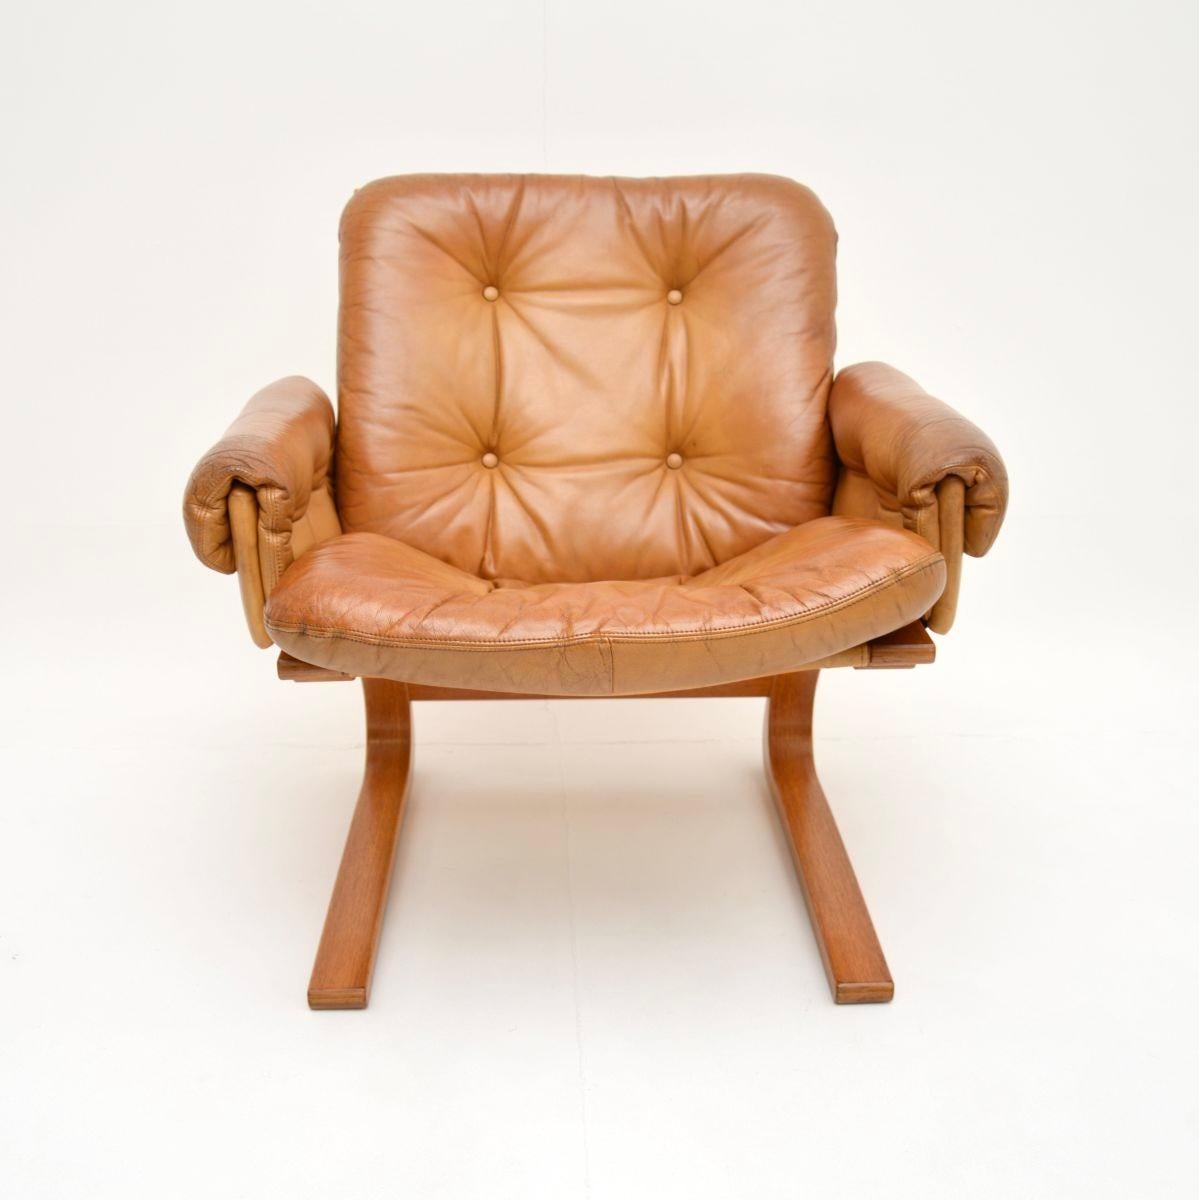 A stylish and extremely comfortable vintage leather Kengu armchair by Elsa and Nordahl Solheim for Rykken. This was made in Norway, it dates from the 1970’s.

The quality is exceptional, this is beautifully designed and is really, really comfortable